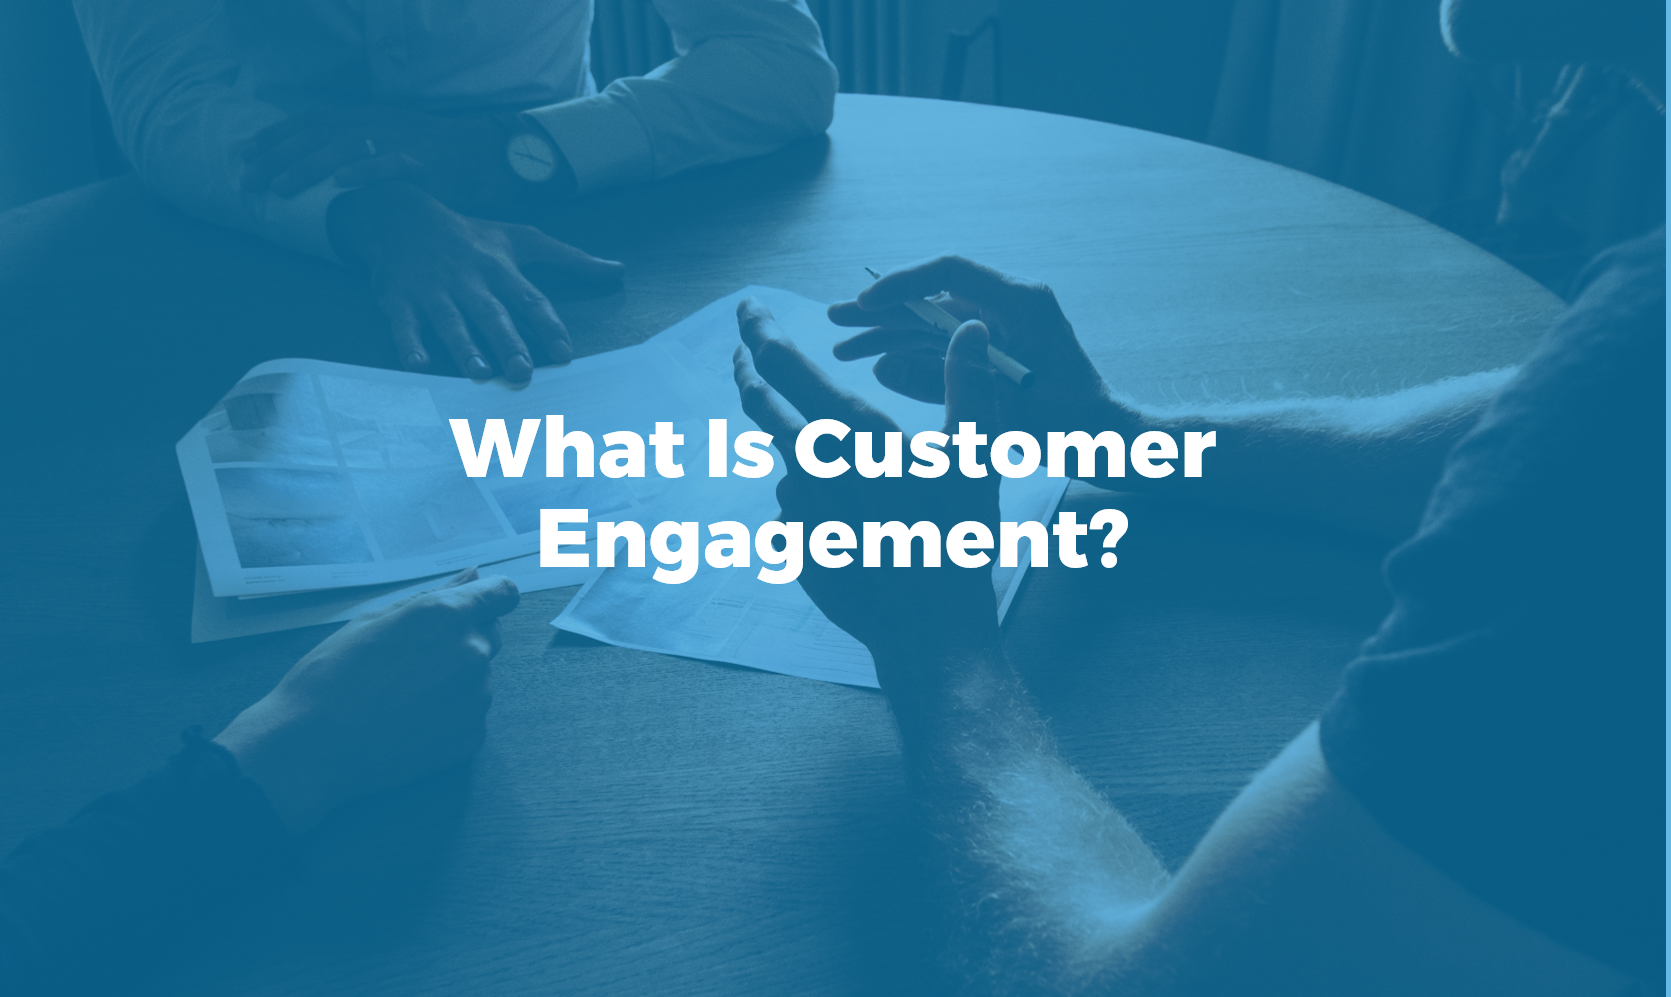 What is customer engagement